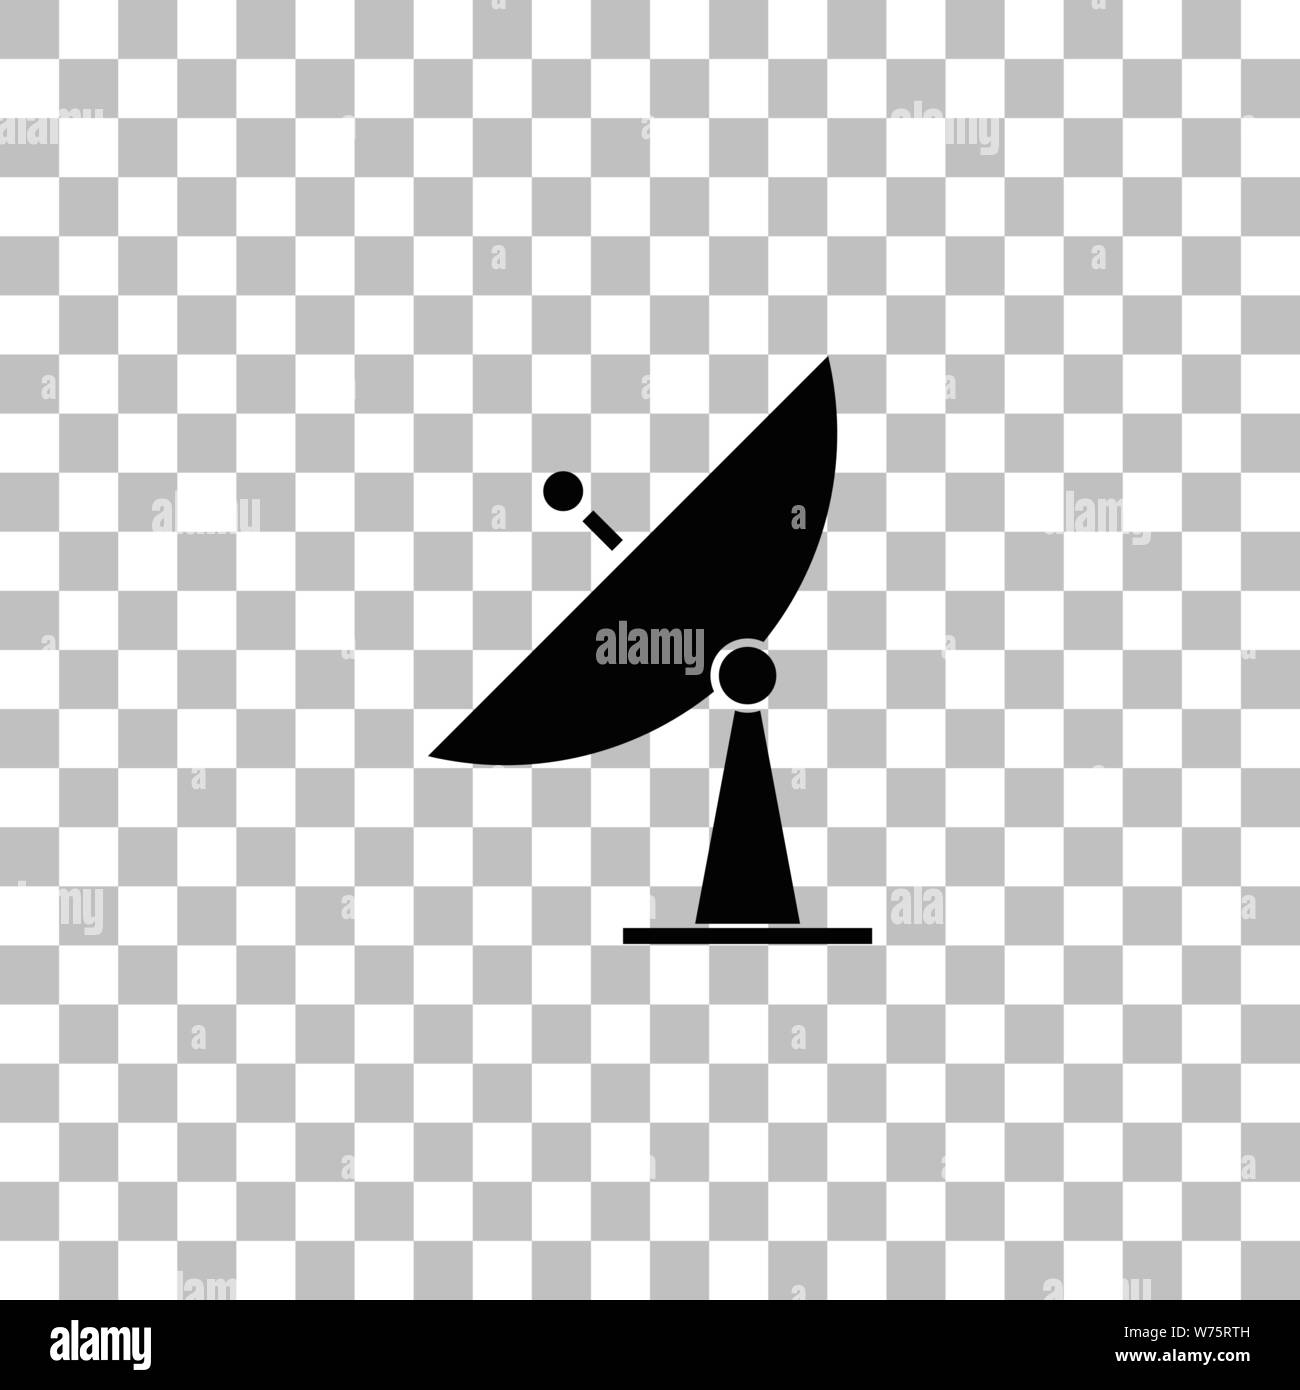 Satellite TV. Black flat icon on a transparent background. Pictogram for your project Stock Vector